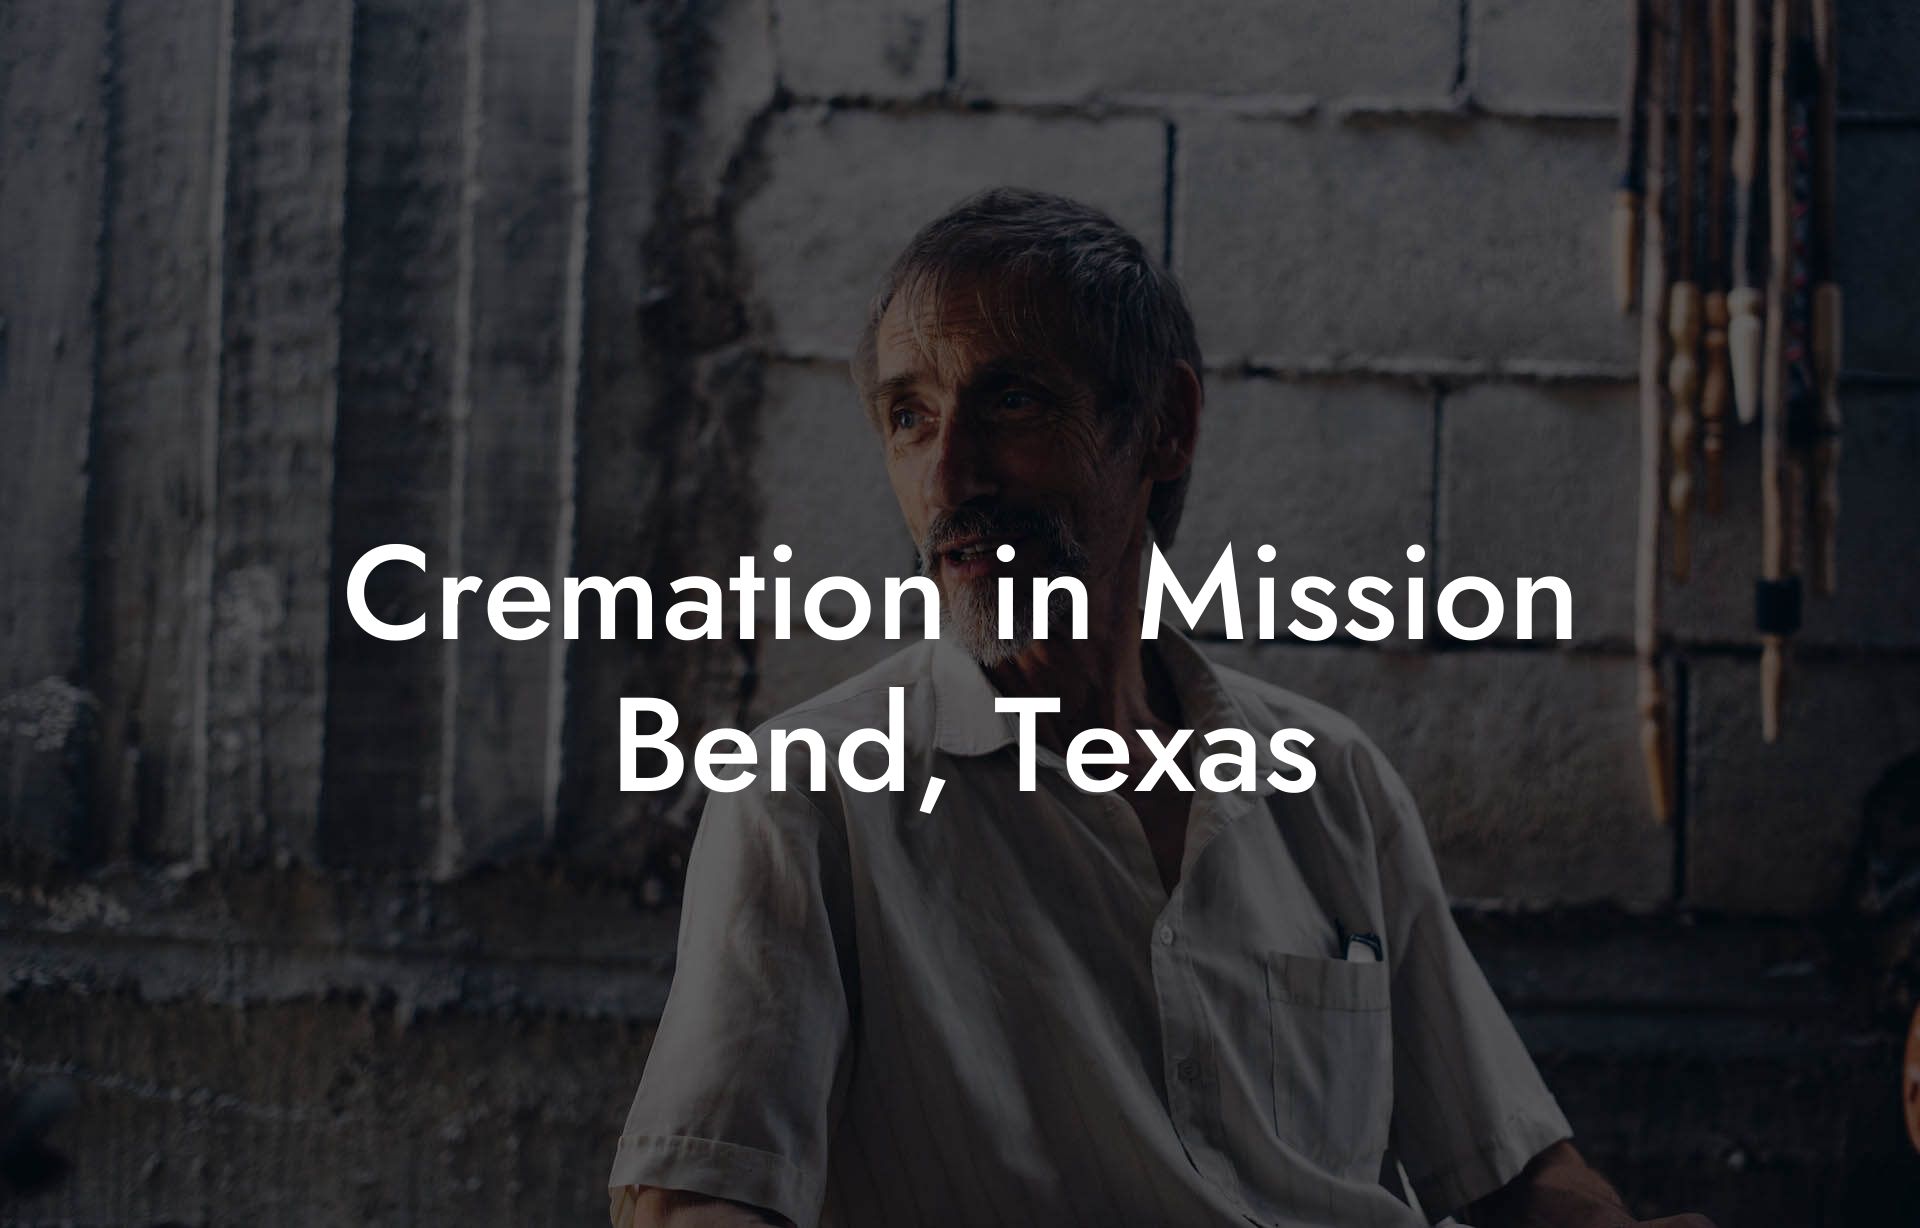 Cremation in Mission Bend, Texas